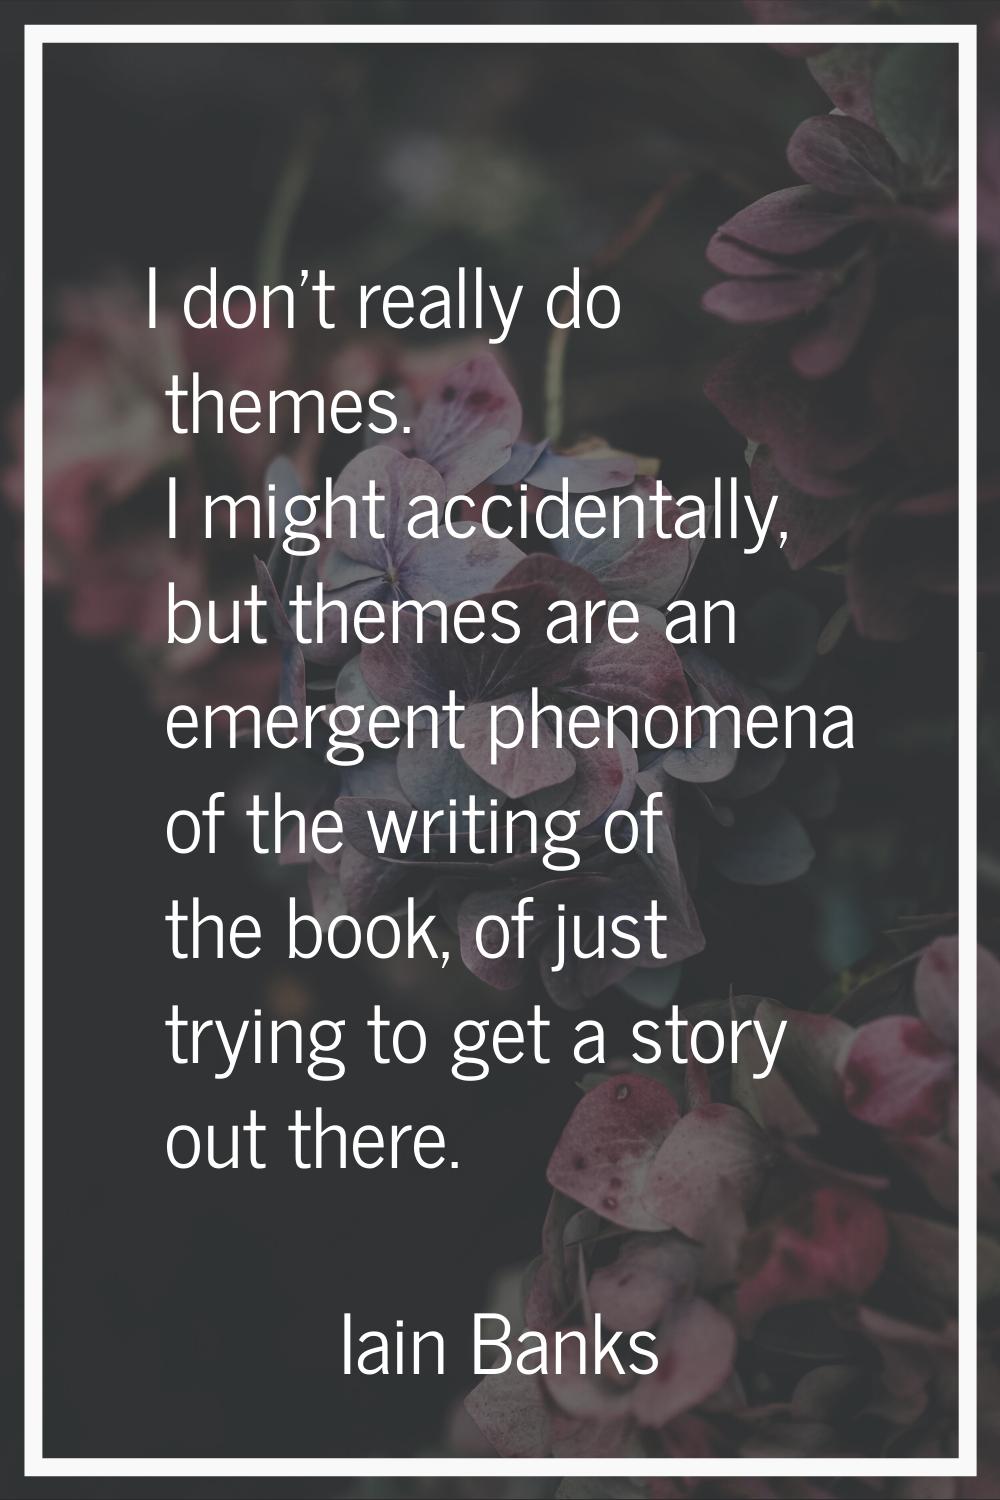 I don't really do themes. I might accidentally, but themes are an emergent phenomena of the writing